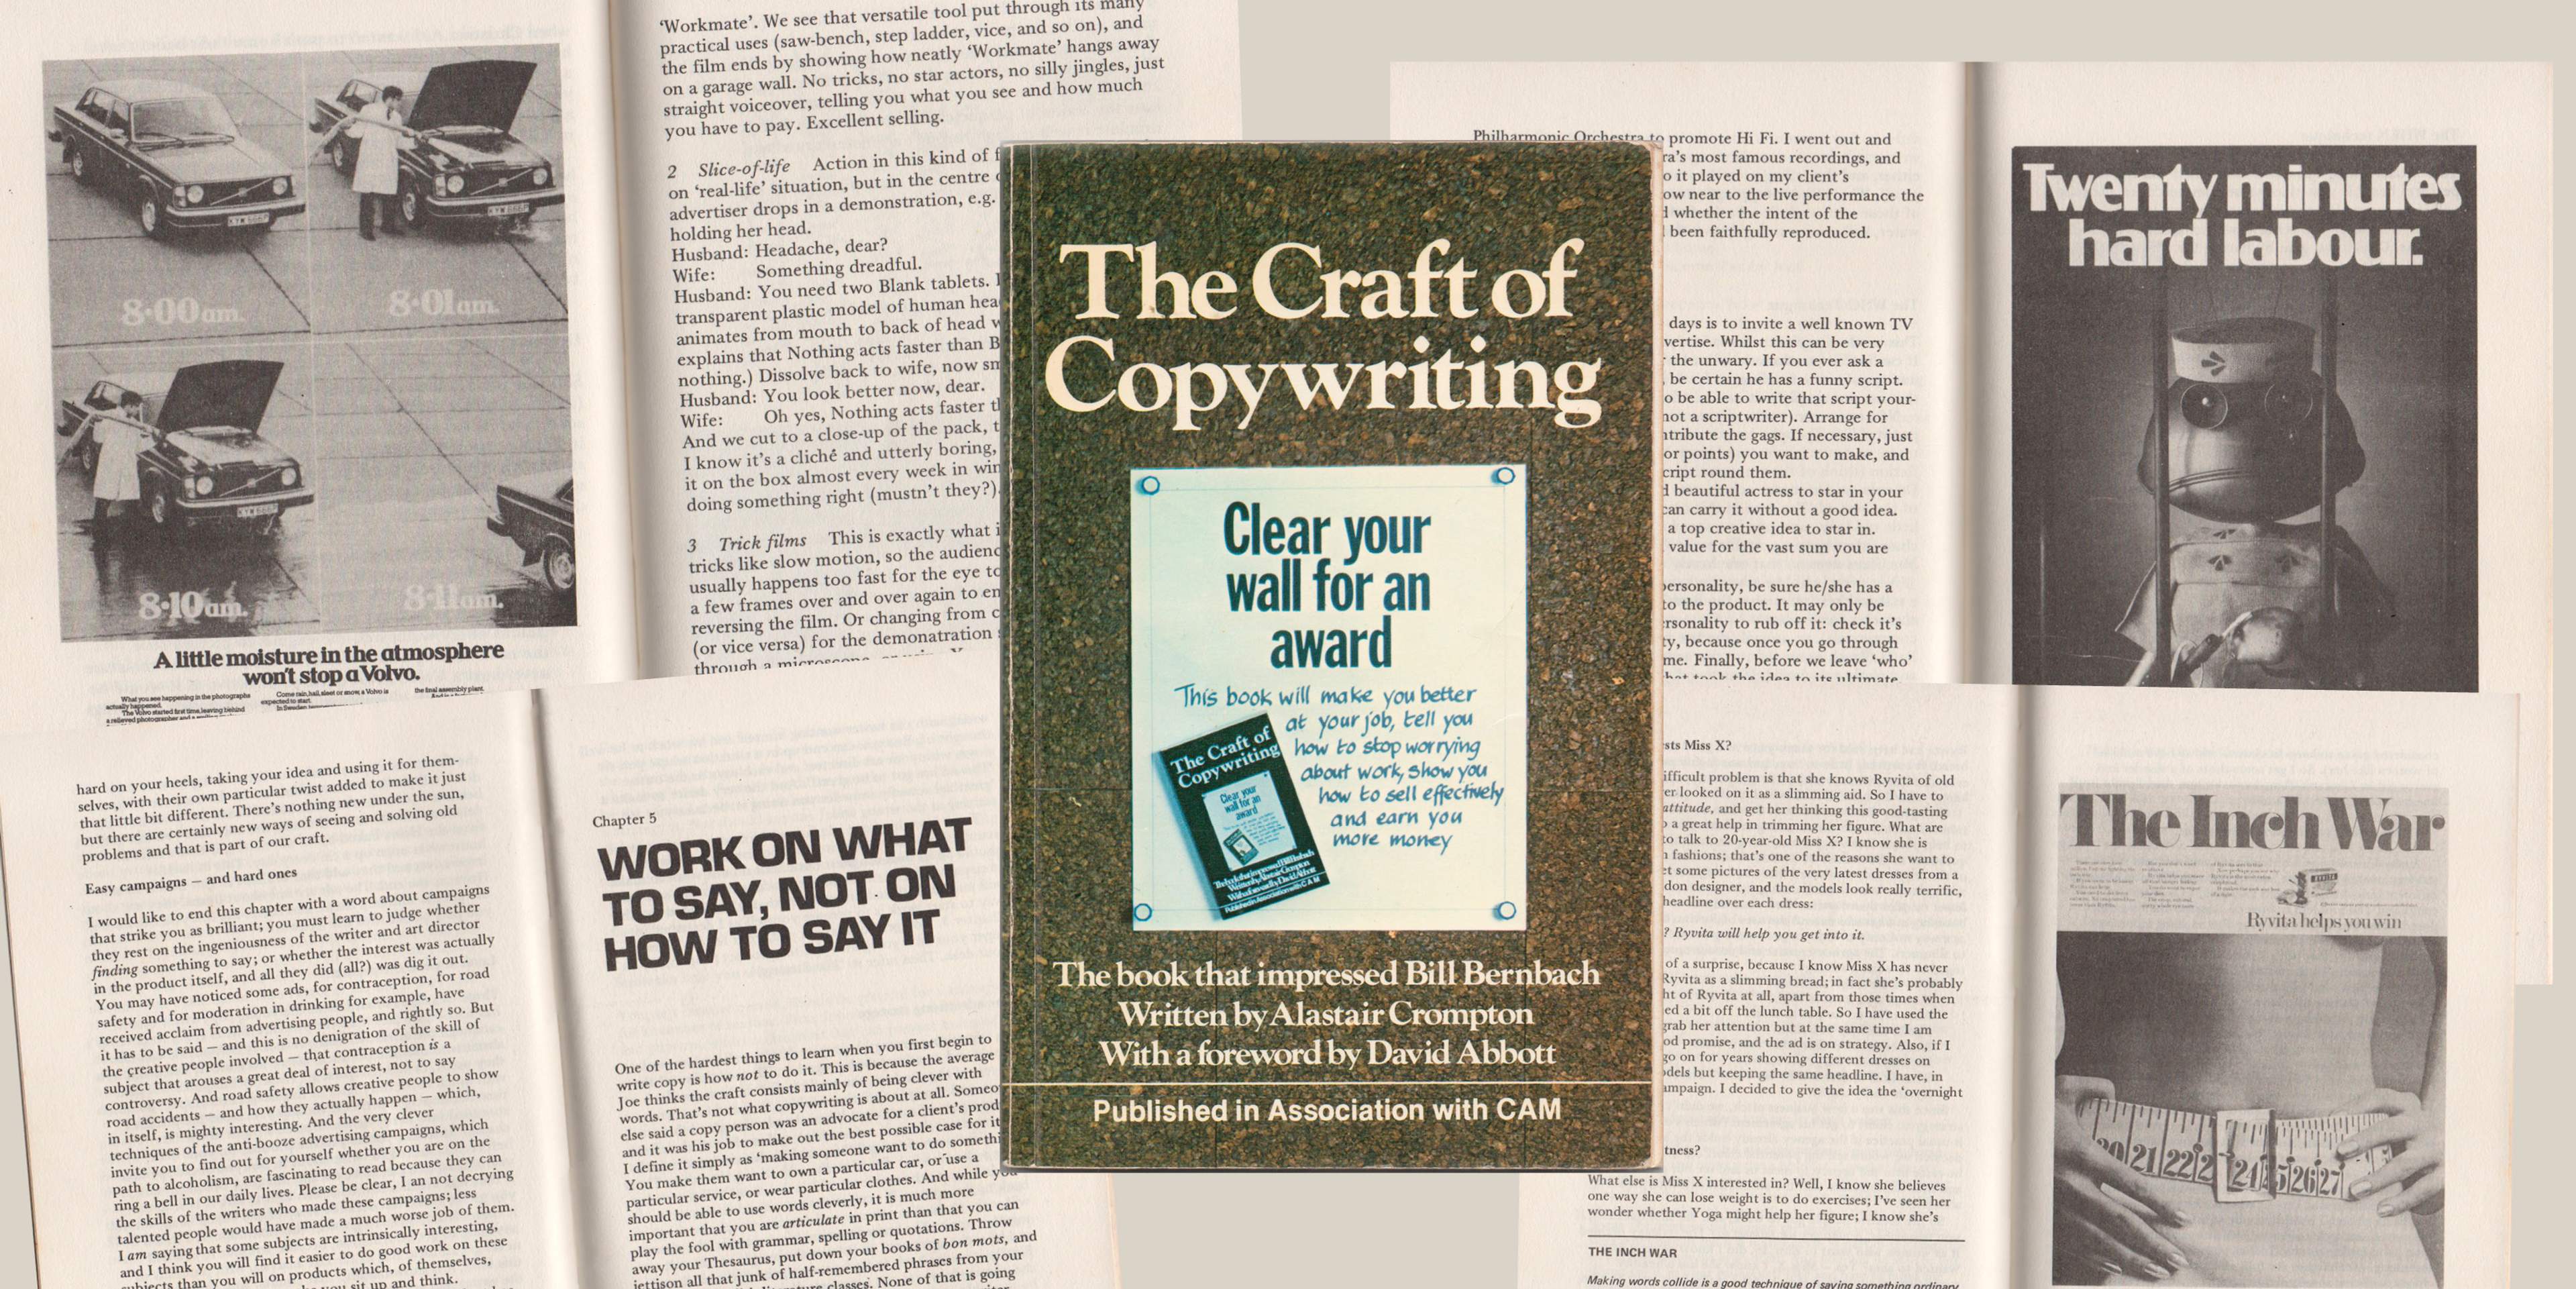 The Craft of Copywriting by Alastair Crompton cover with some spreads from the book. Ryvita - The Inch War, Smash ad and Volvo ads. 